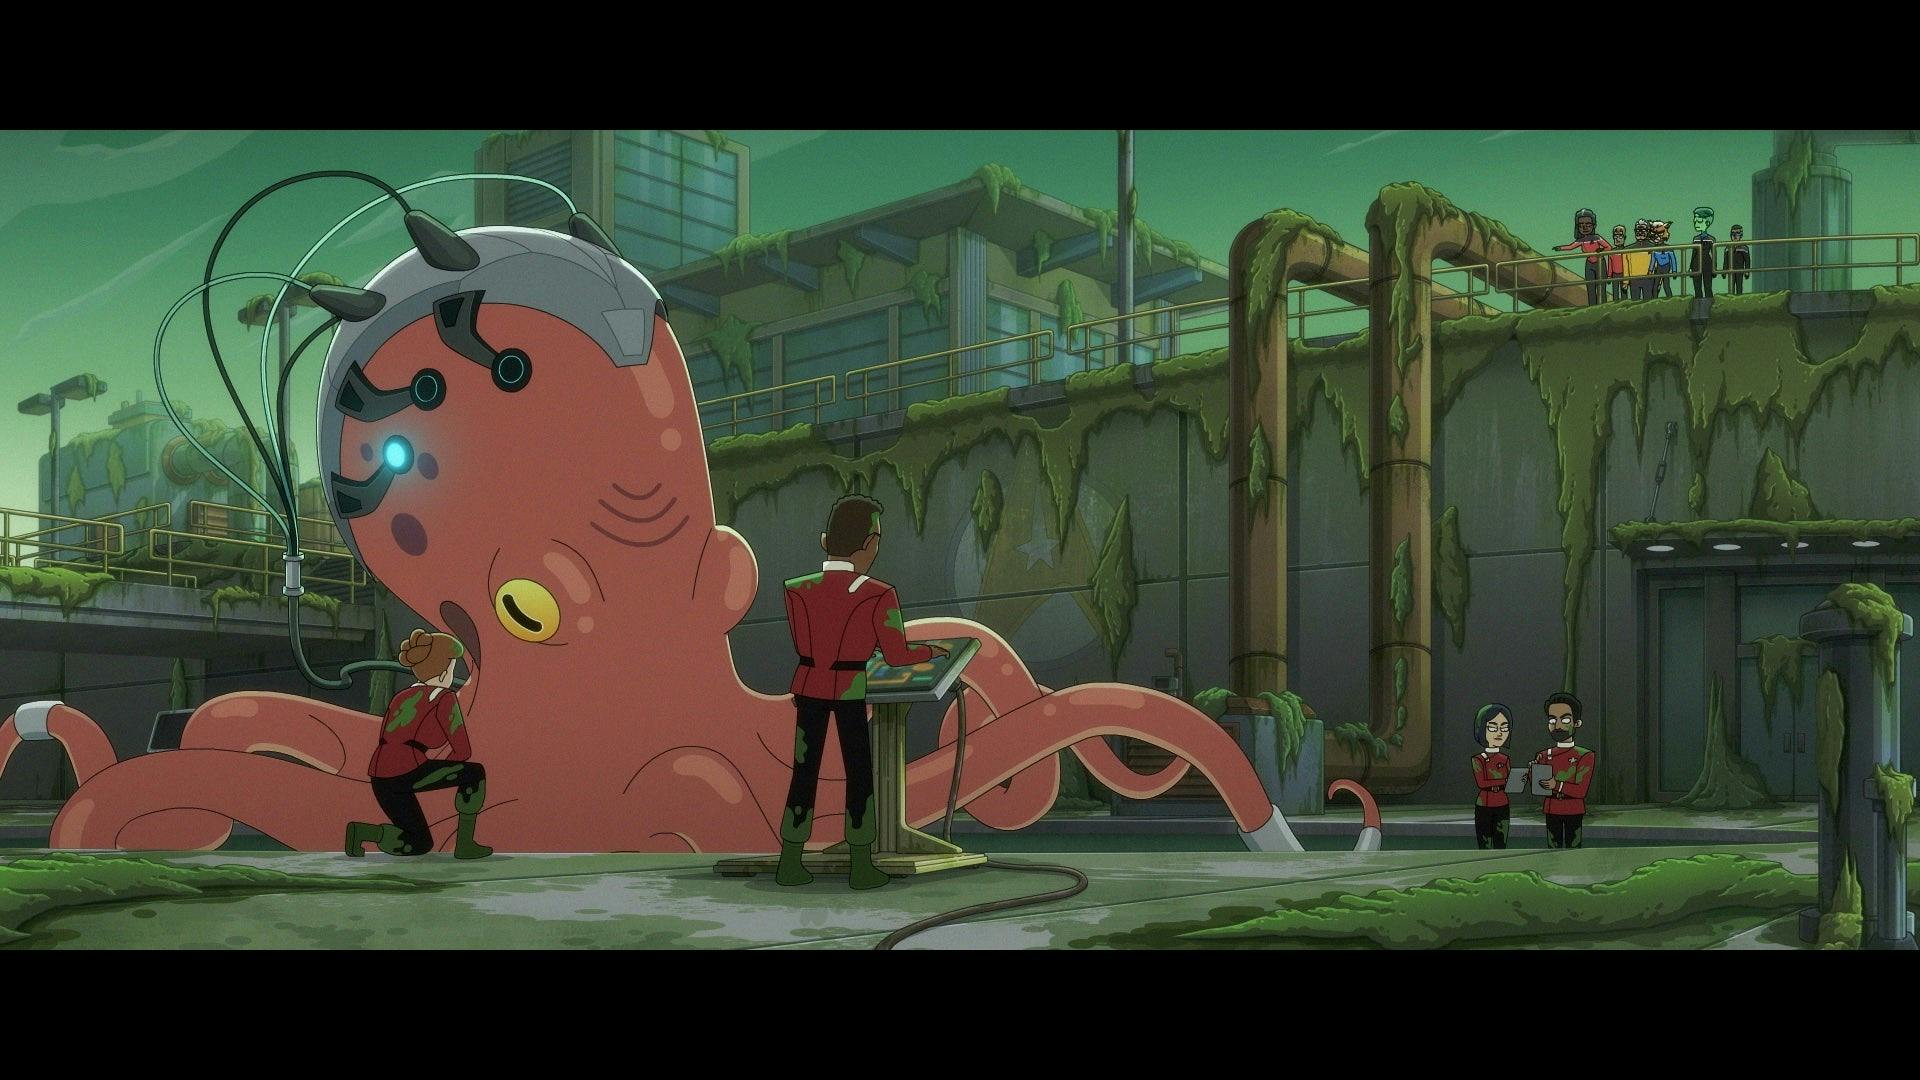 A giant octopus has sensors attached to it.